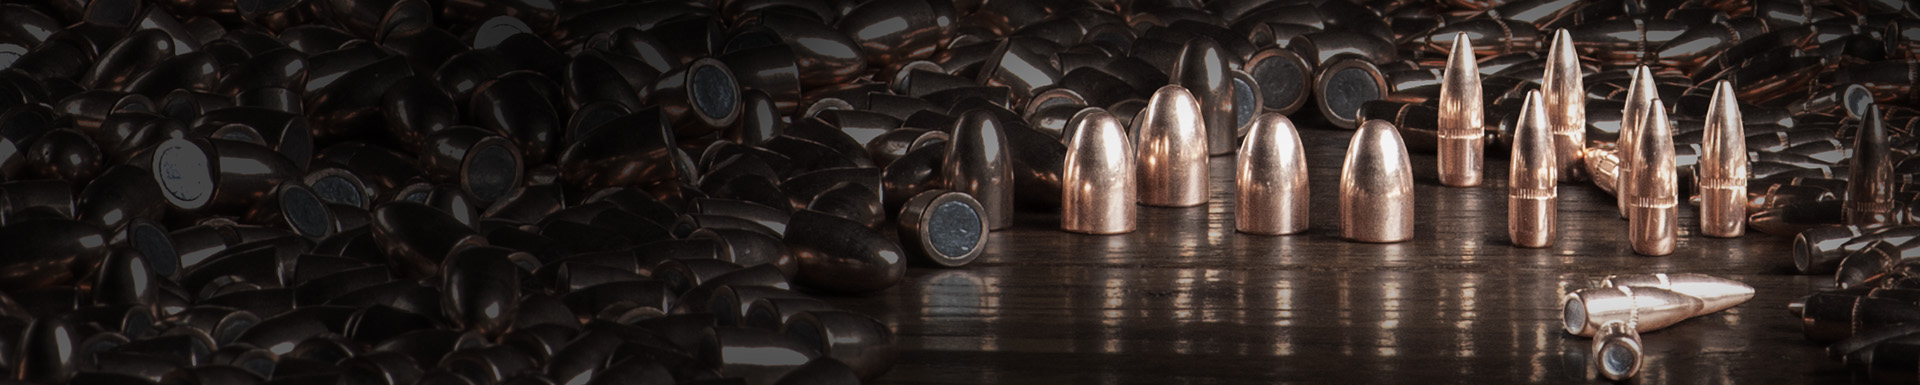 2755-Bullet-Promo-Site-Banners_CP_HeroCarousel_1920x385